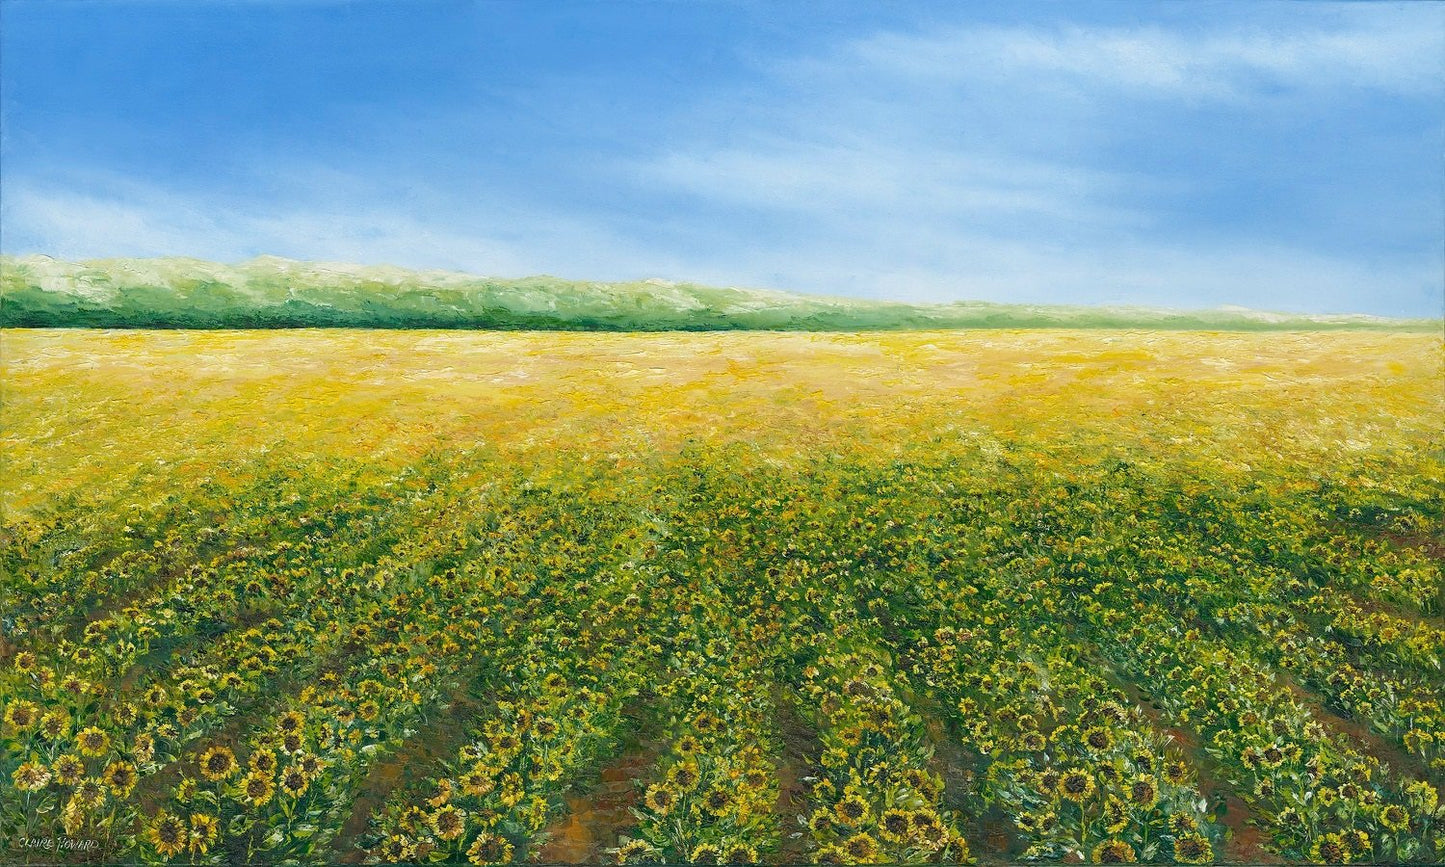 CUSTOM ORDER | Sun Flower Field Original Oil Painting | "Sunlight" | Gallery Wrapped | Artist: Claire Howard | 36 by 60 Inches-Oil Painting-Sterling-and-Burke